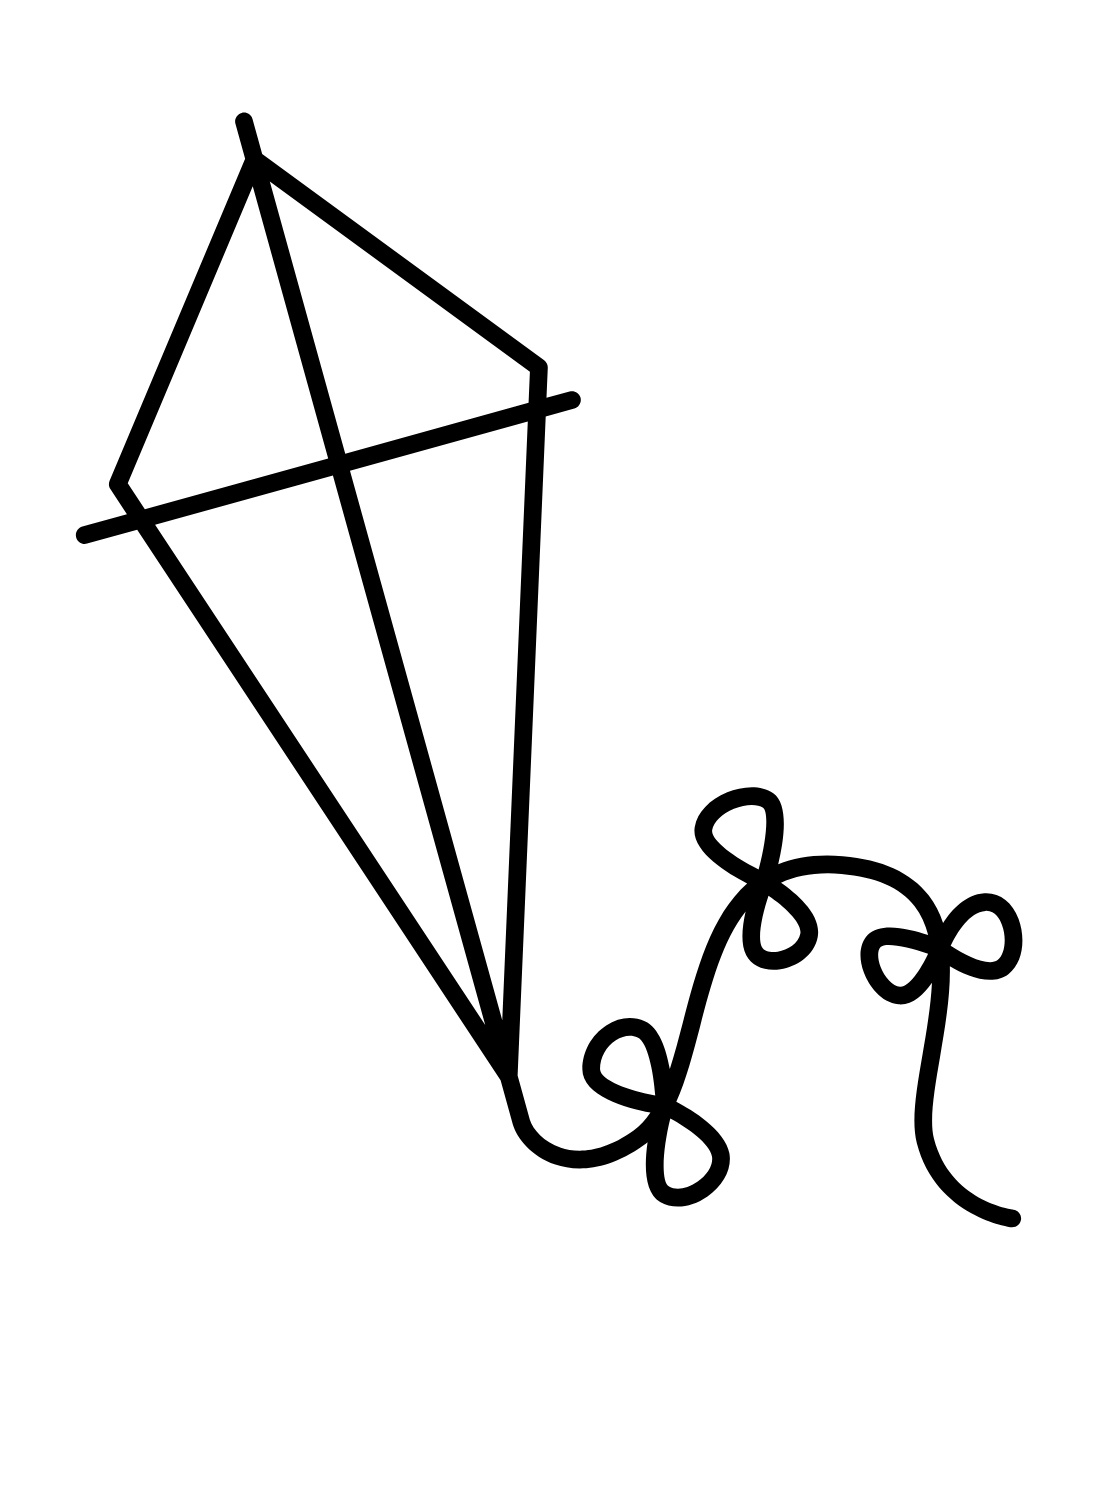 Easy Kite Coloring Page